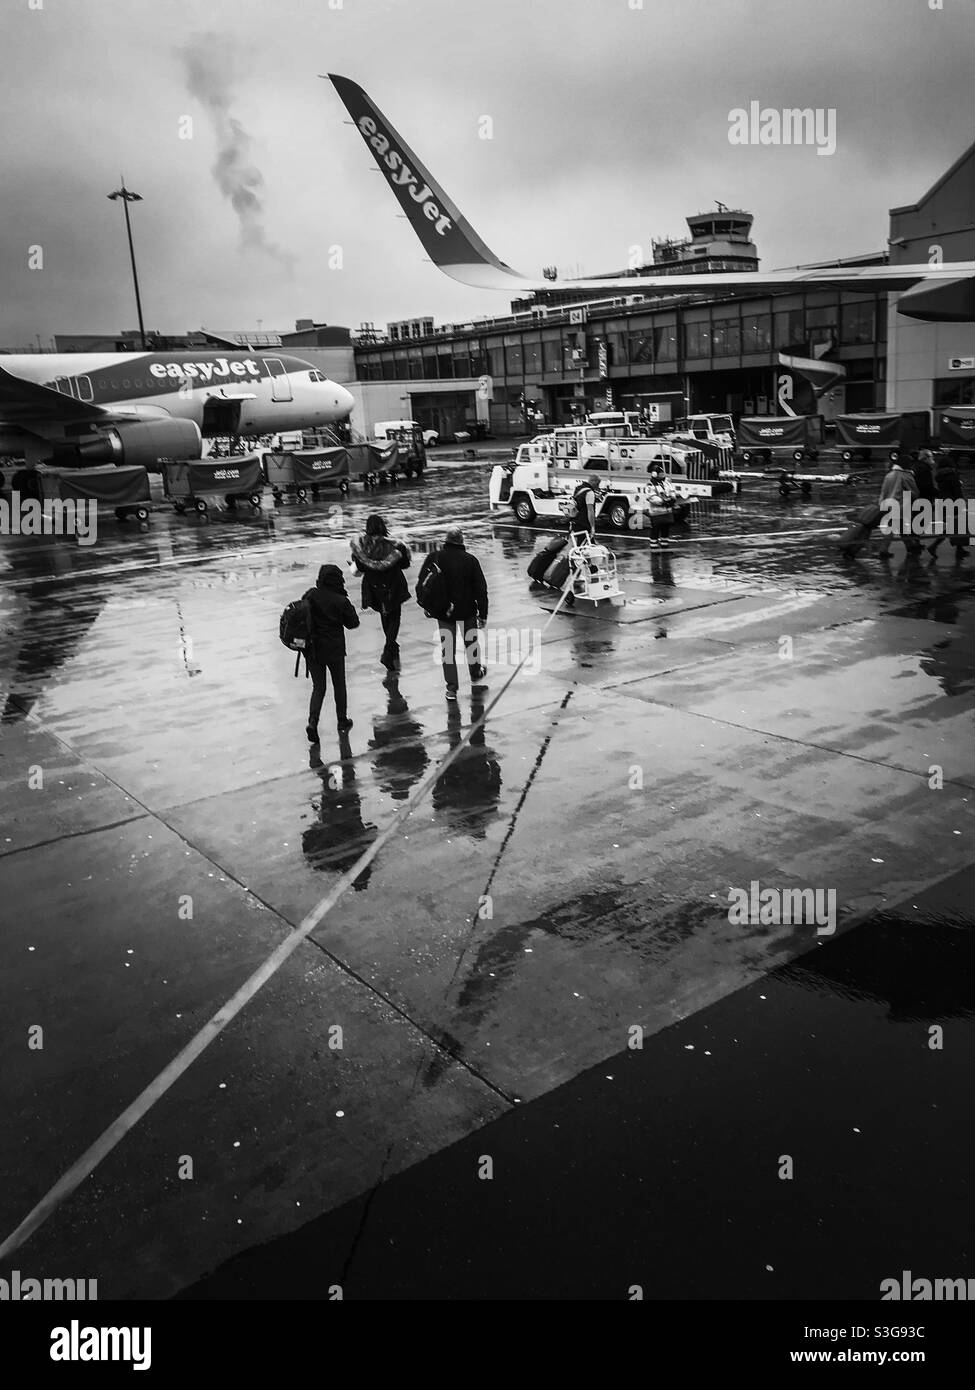 Manchester airport gate in the rain Stock Photo